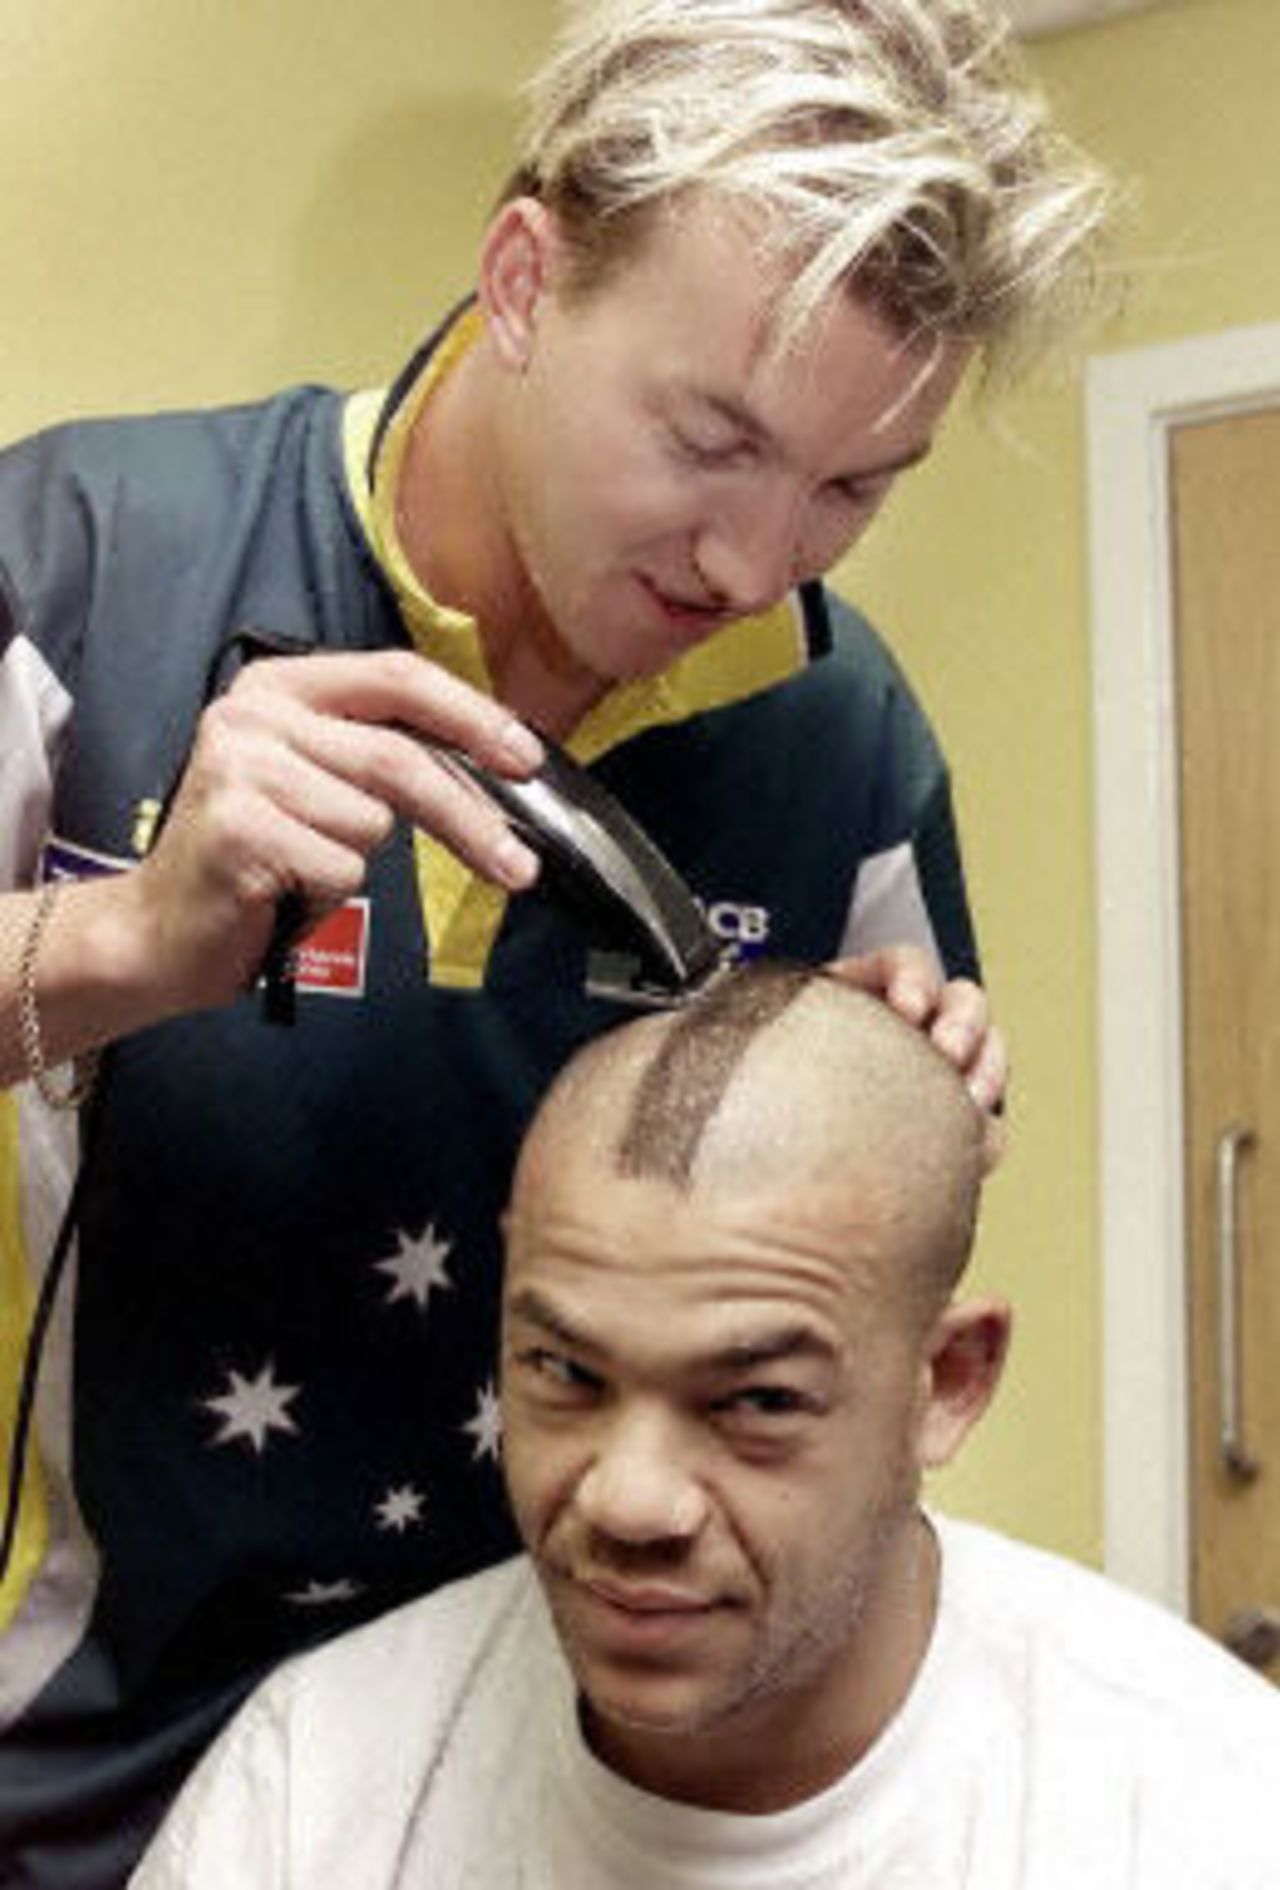 Australian fast bowler Brett Lee gives Andrew Symonds a Mohawk haircut made famous by the Manchester United soccer player David Beckham as rain delays the start of Australia's match against Pakistan, 6th ODI at Chester-le-Street, 16 June 2001.